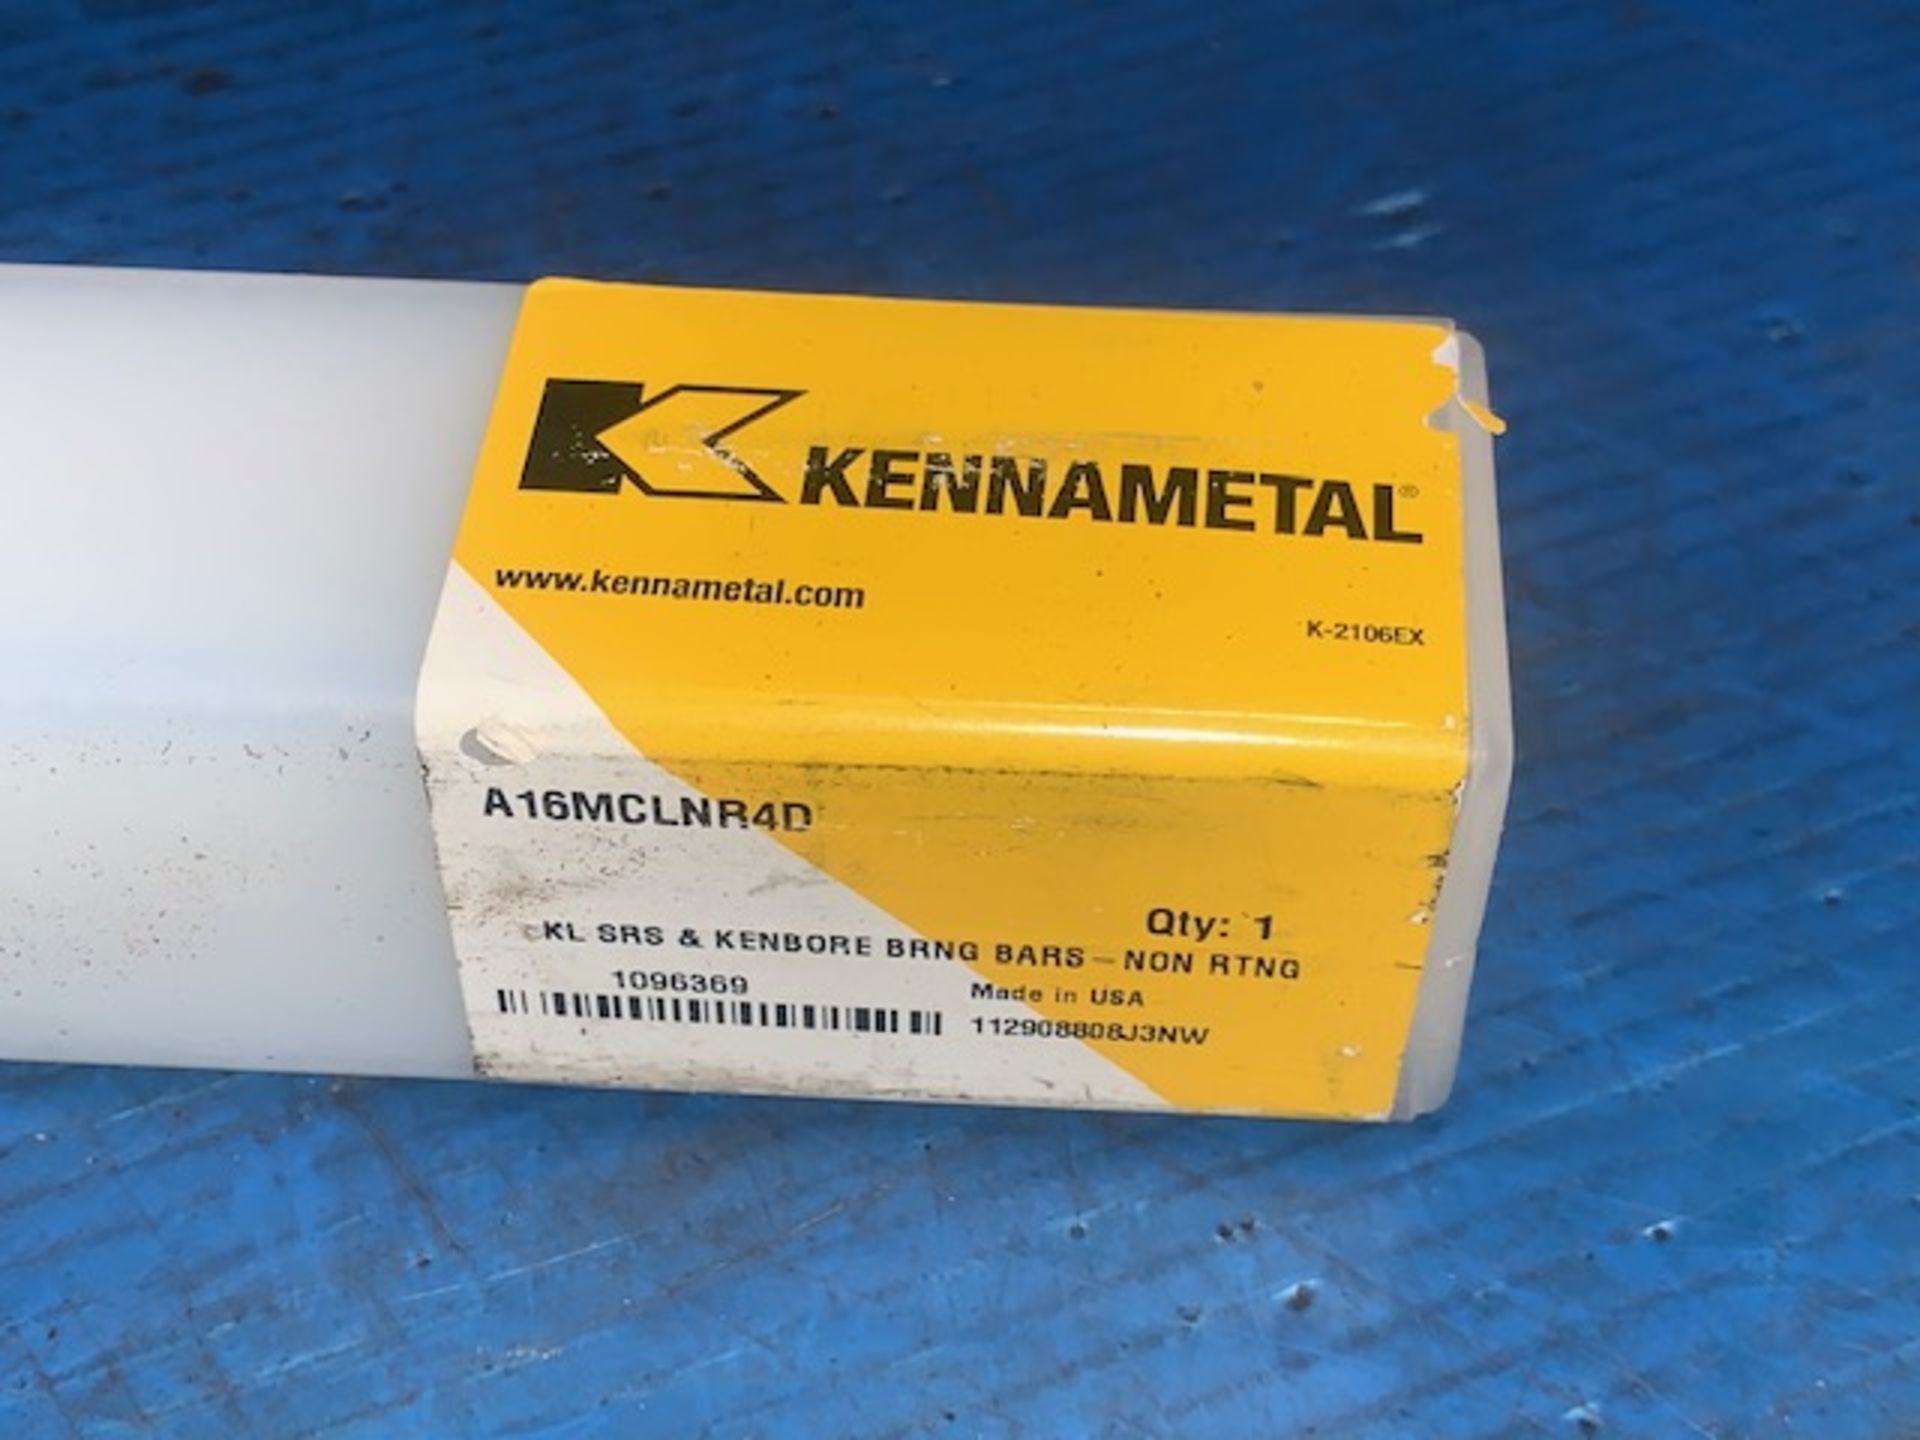 *NEW* Kennametal 1" Indexable Boring Bars #A16T-MCLNR4D - Image 2 of 6